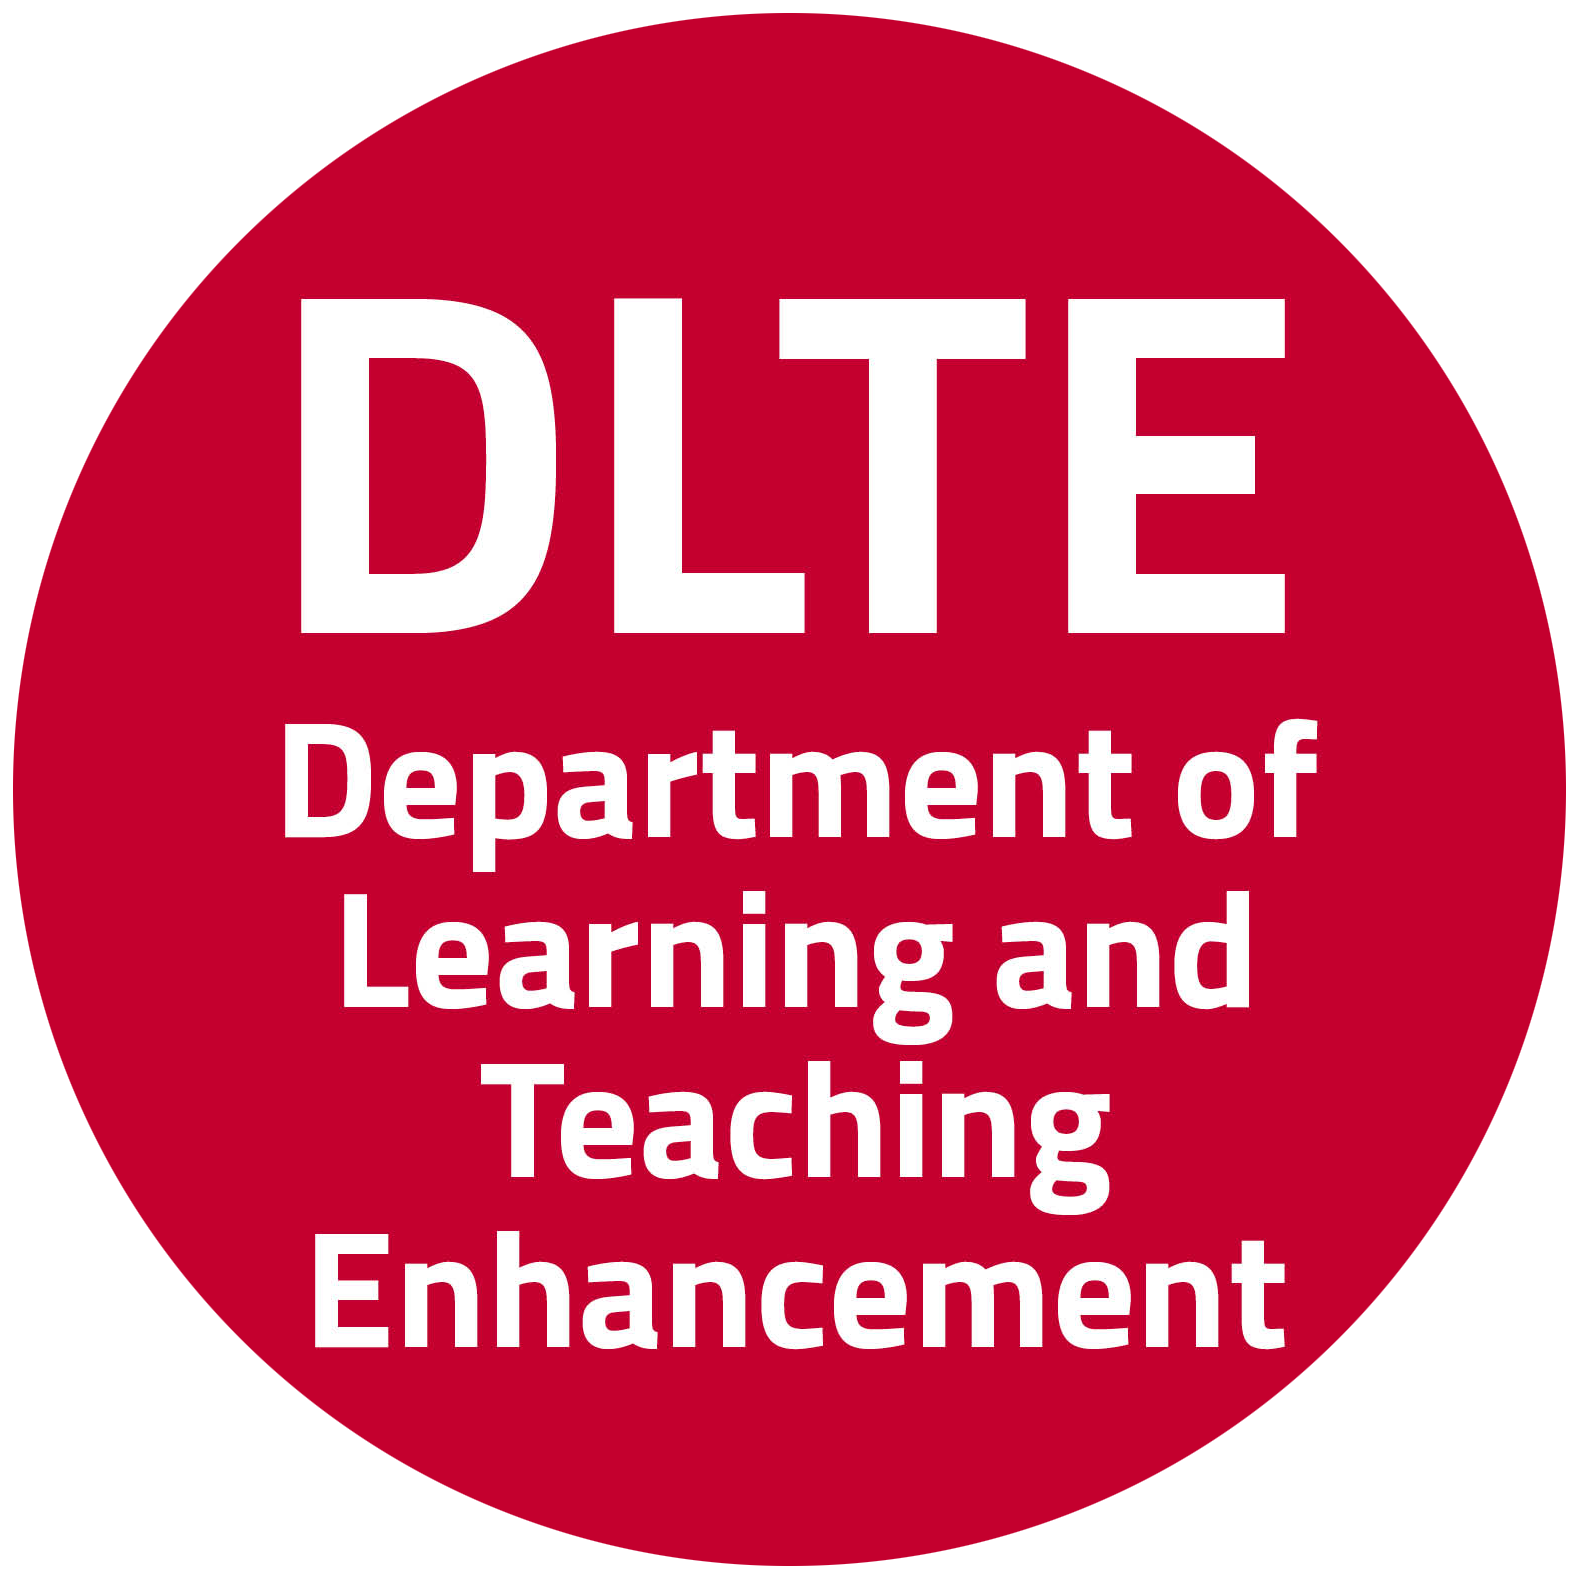 DLTE: Department of Learning and Teaching Enhancement